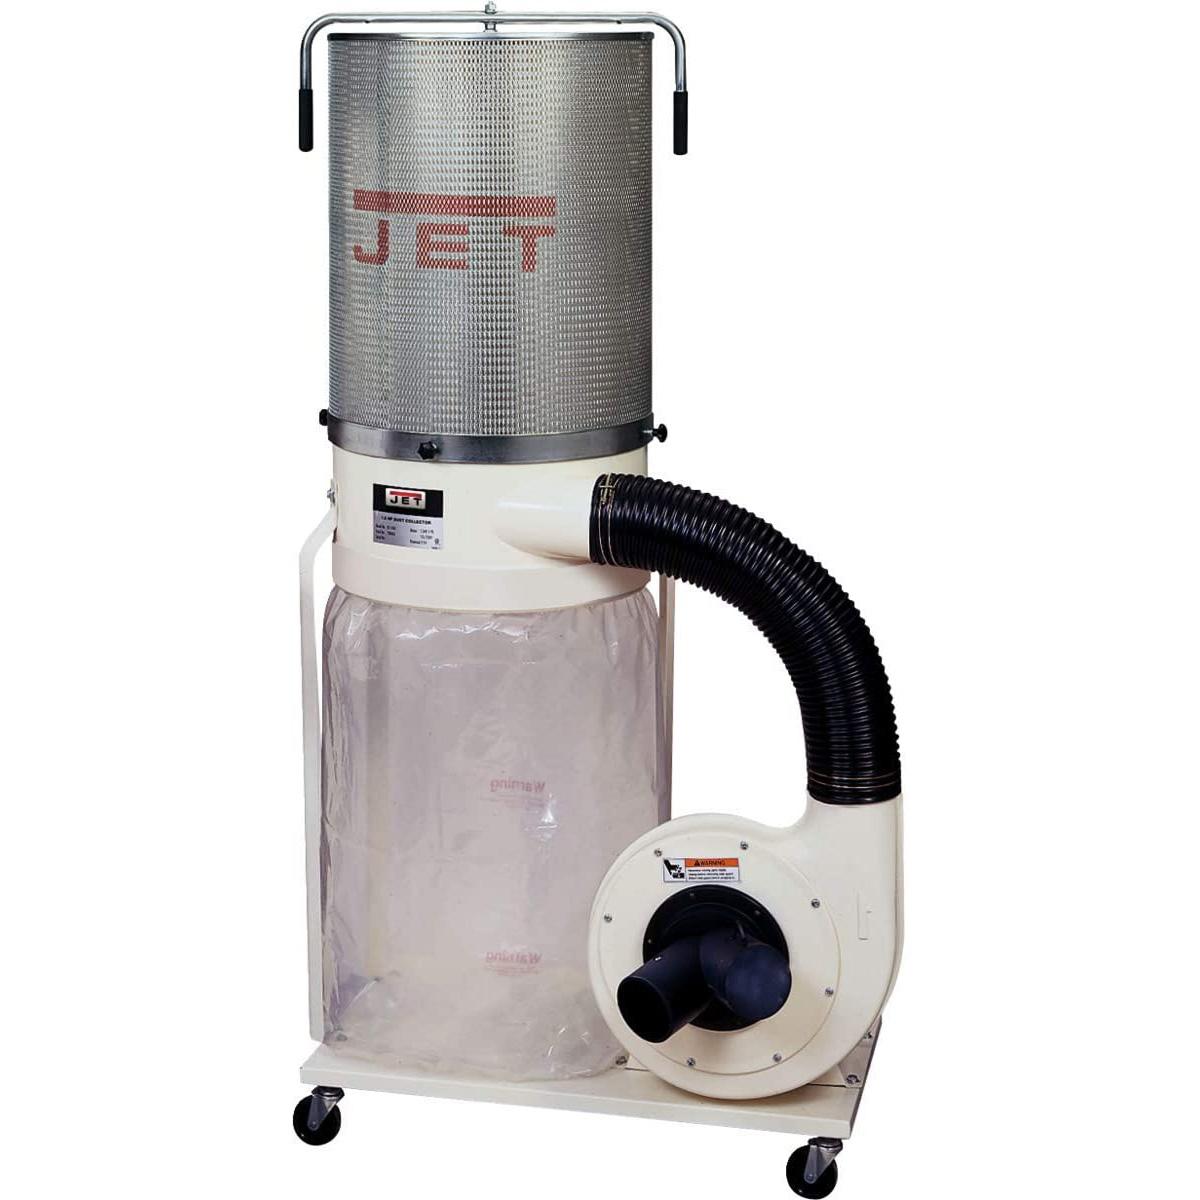 Jet Dust Collector 2-Micron Canister Kit for $480.14 Shipped